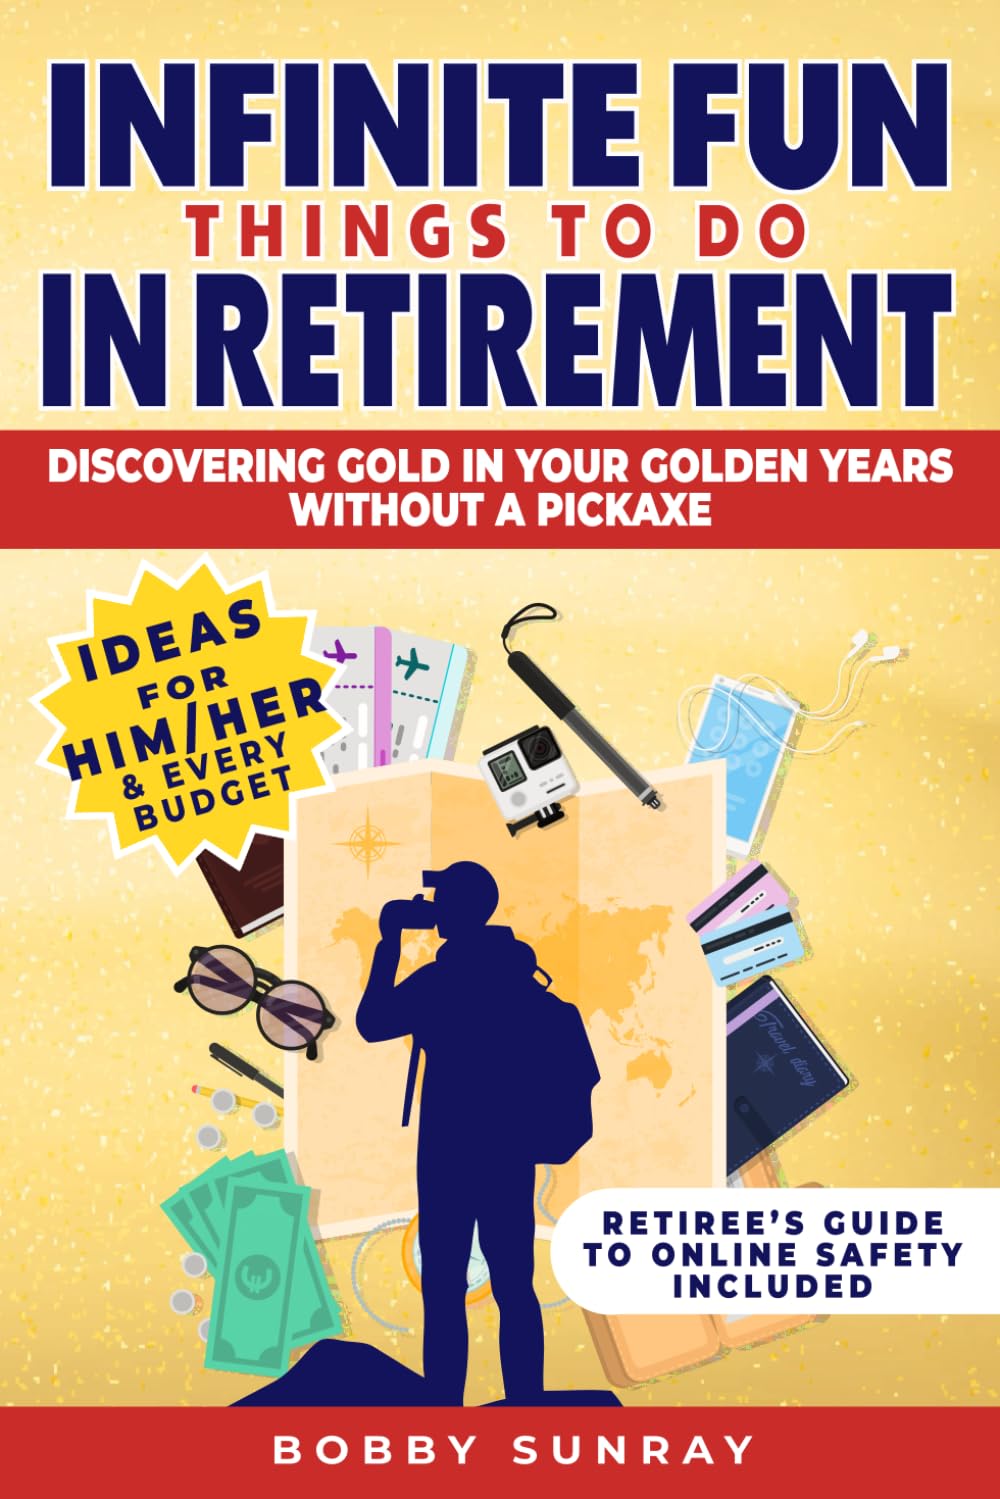 Infinite Fun Things to Do in Retirement: Discovering Gold in Your Golden Years Without a Pickaxe